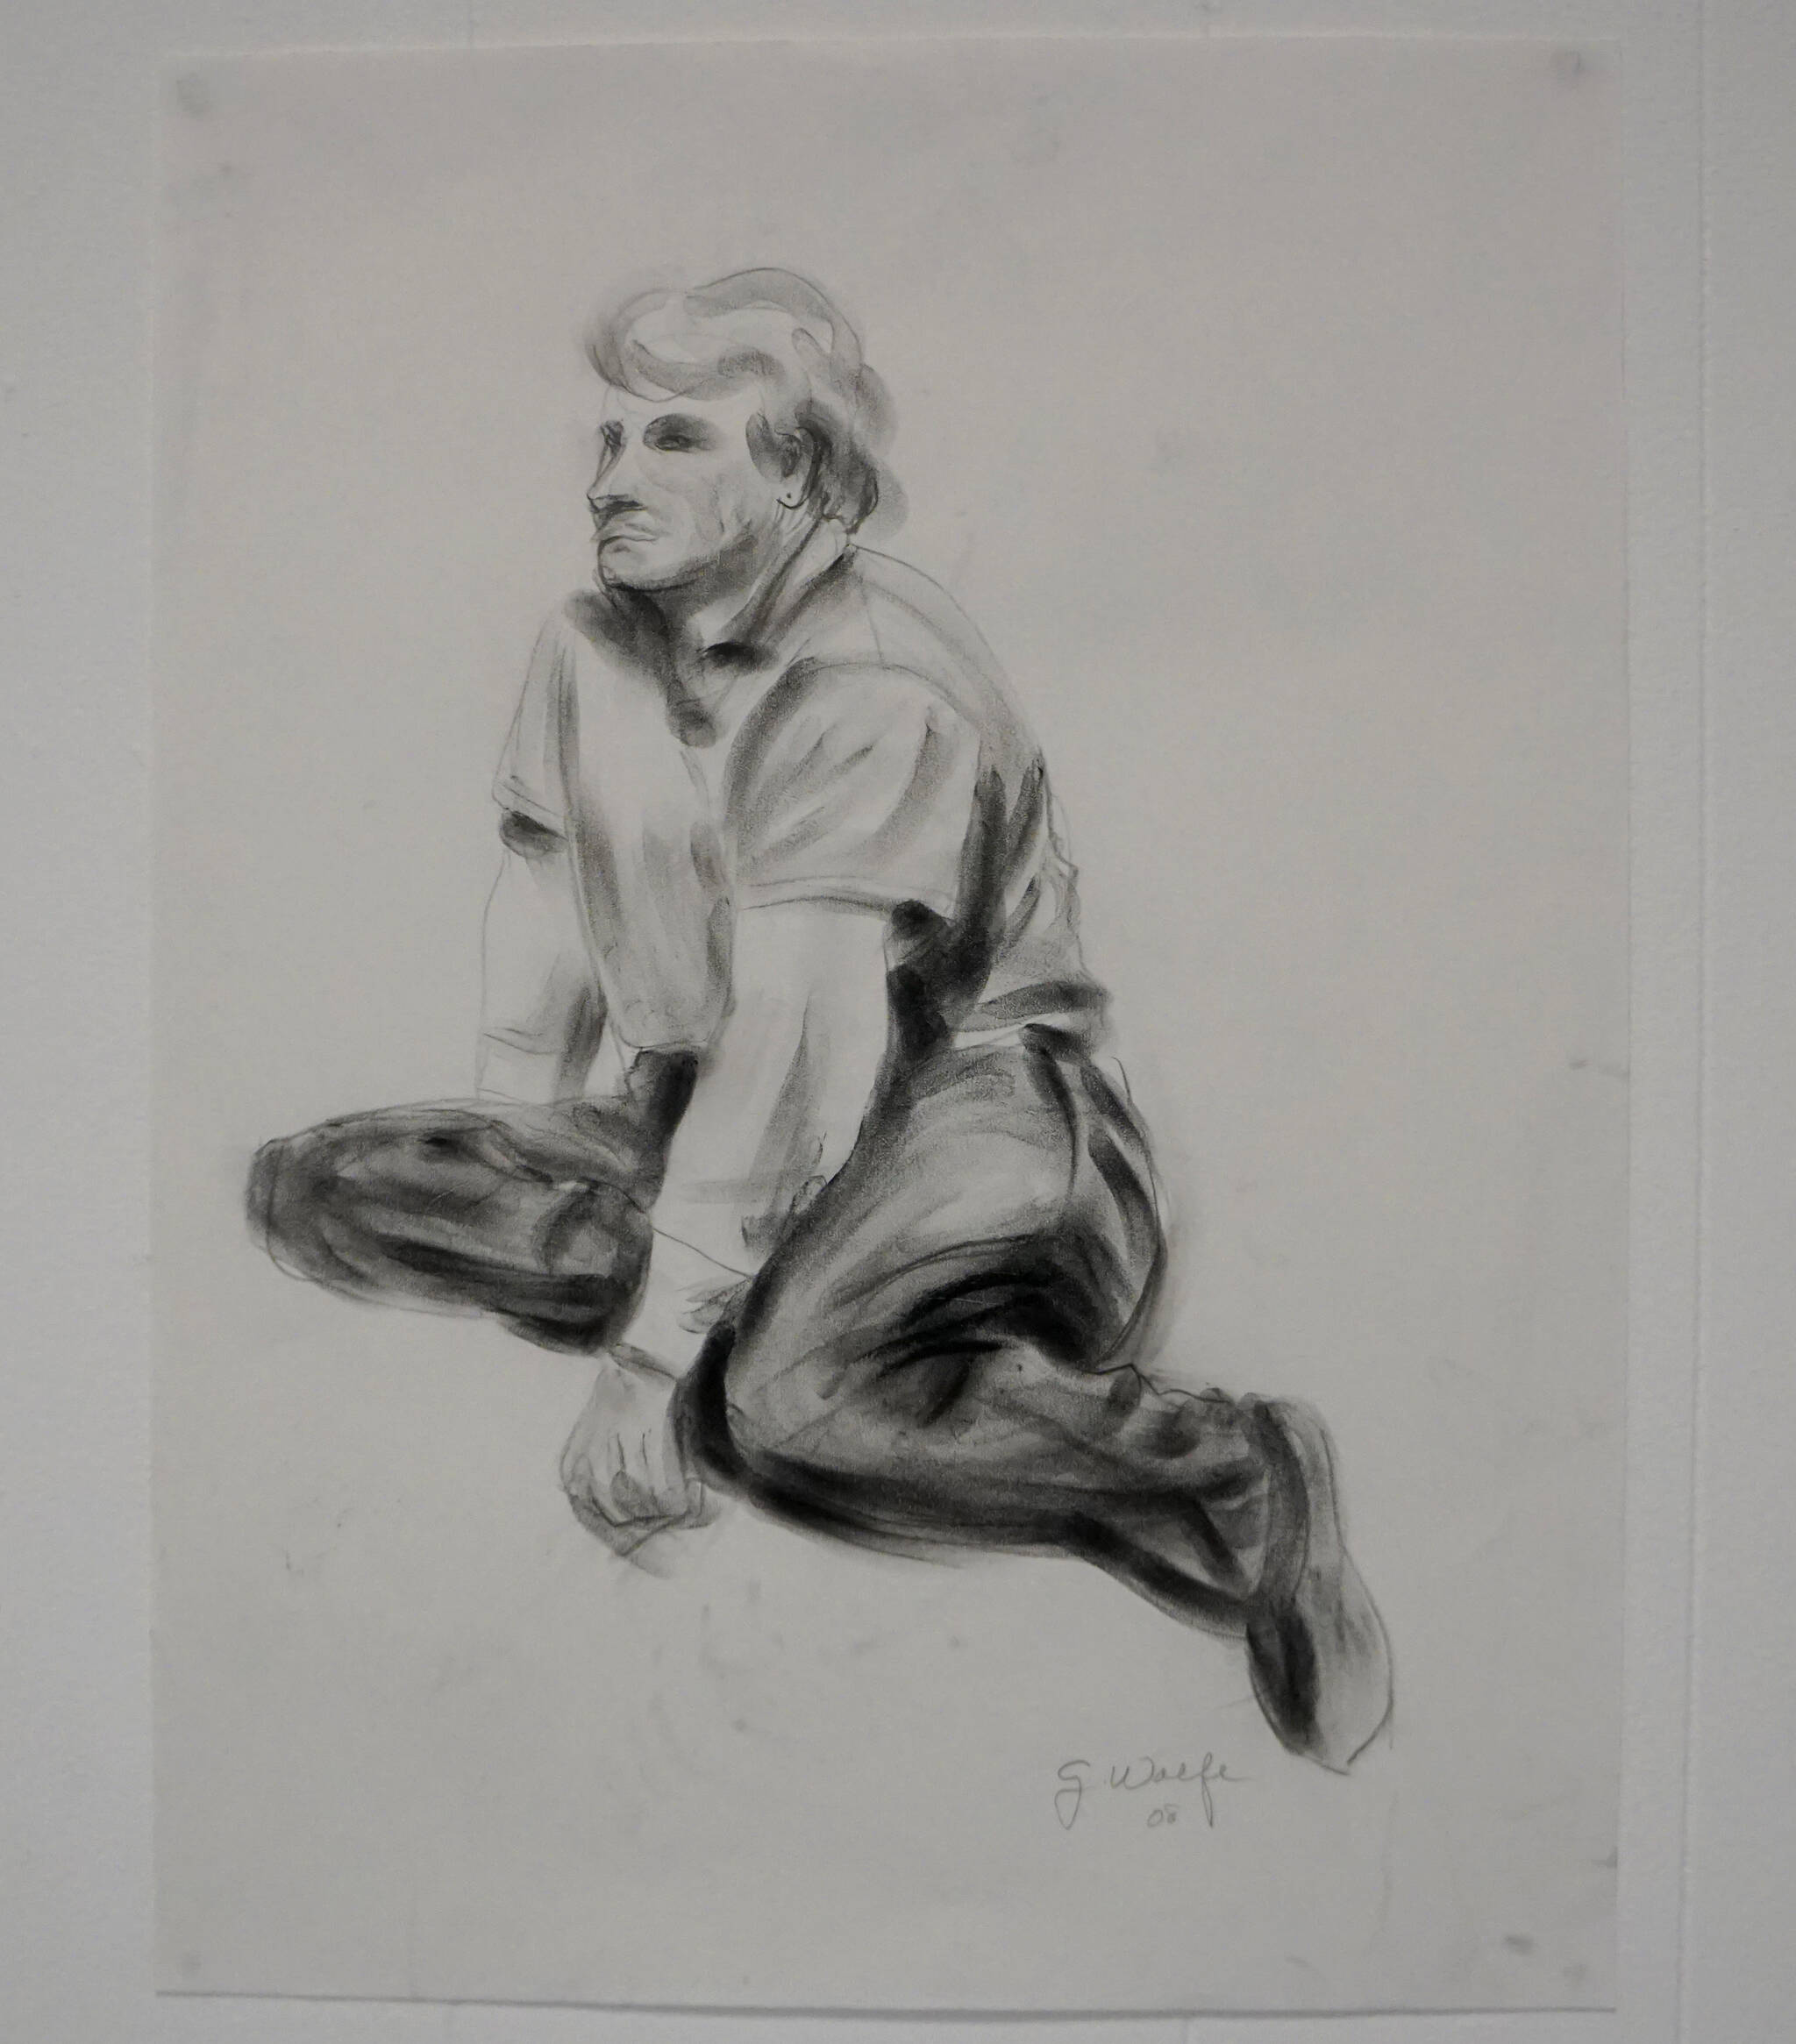 “Selected Works and Sketches by Gaye Wolfe,” showing at the Homer Council on the Arts through March, include a sketch of her partner, Sam Smith, part of a series of life drawings she did. (Photo by Michael Armstrong/Homer News)